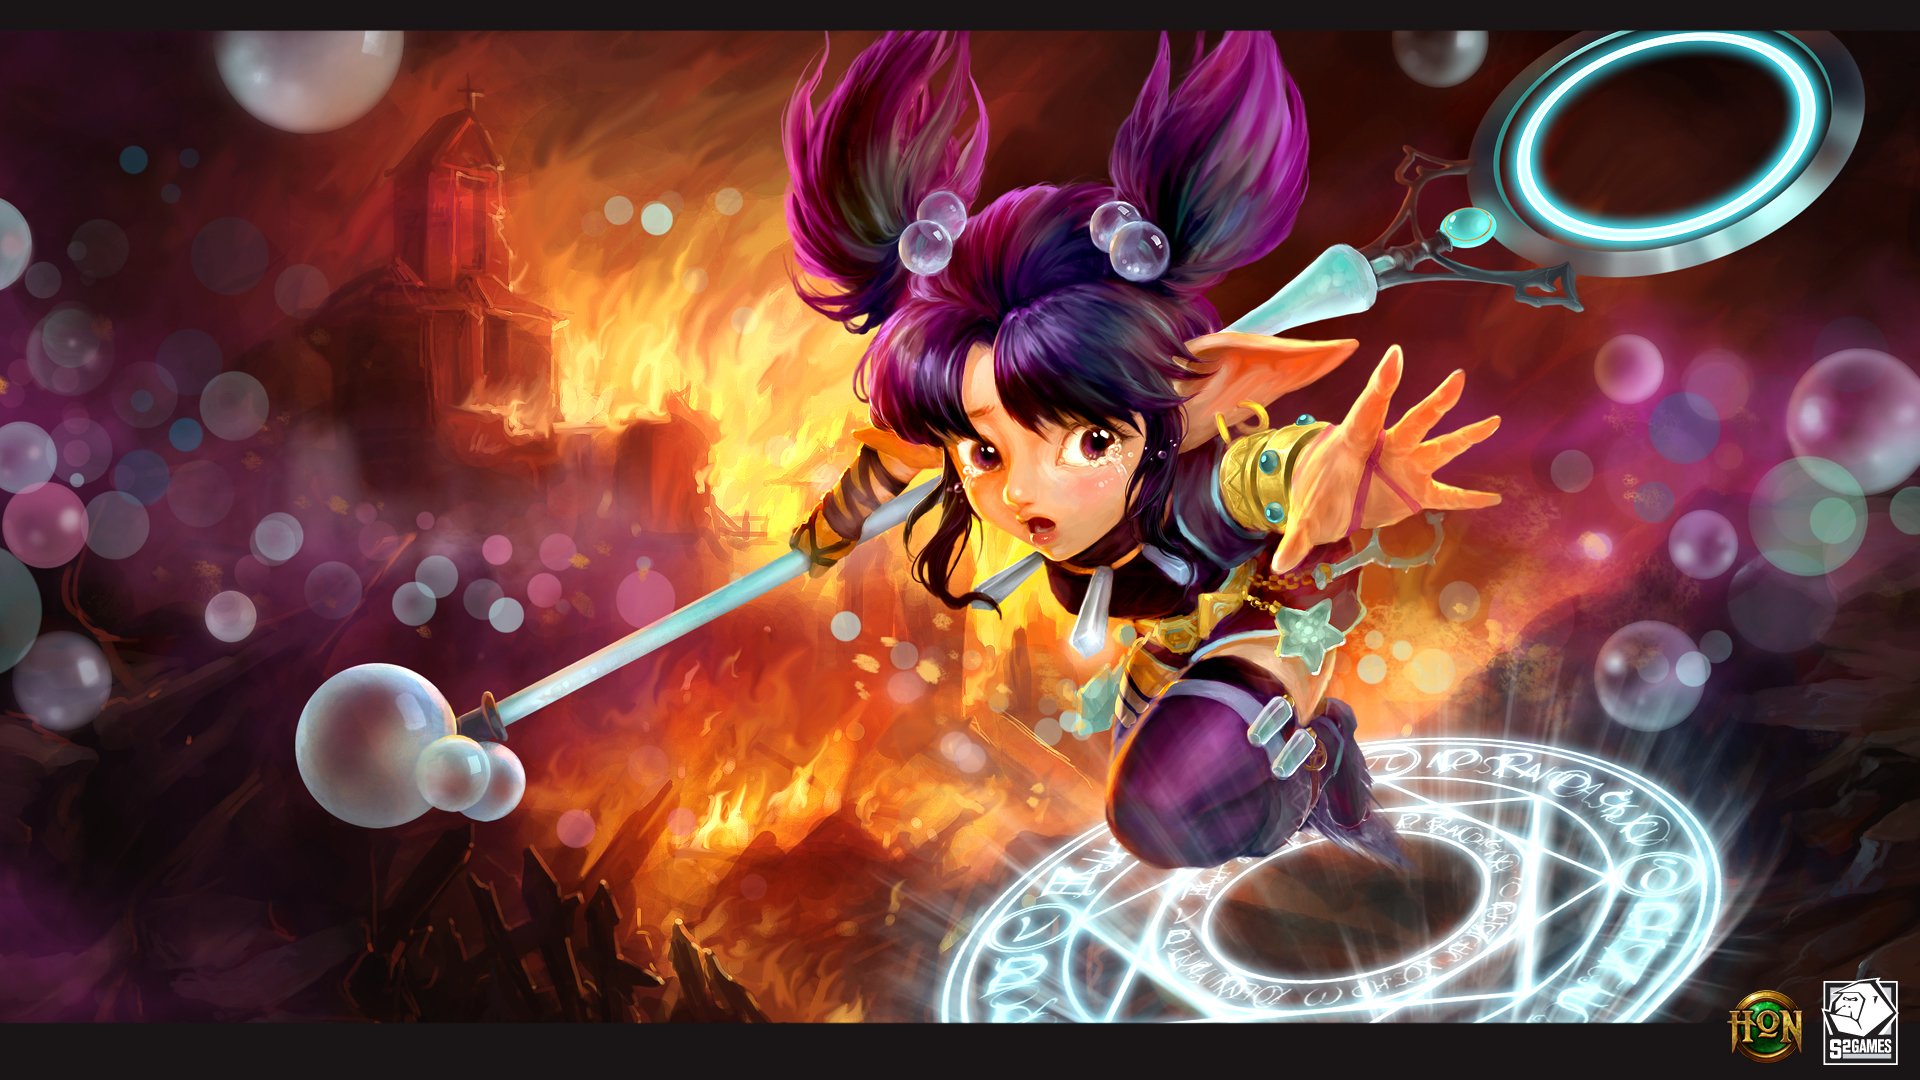 heroes, Of, Newerth, Arena, Mmo, Online, Fighting, Fantasy, 1hon, Moba, Action, Hon, Warrior, Sci fi, Magic Wallpaper